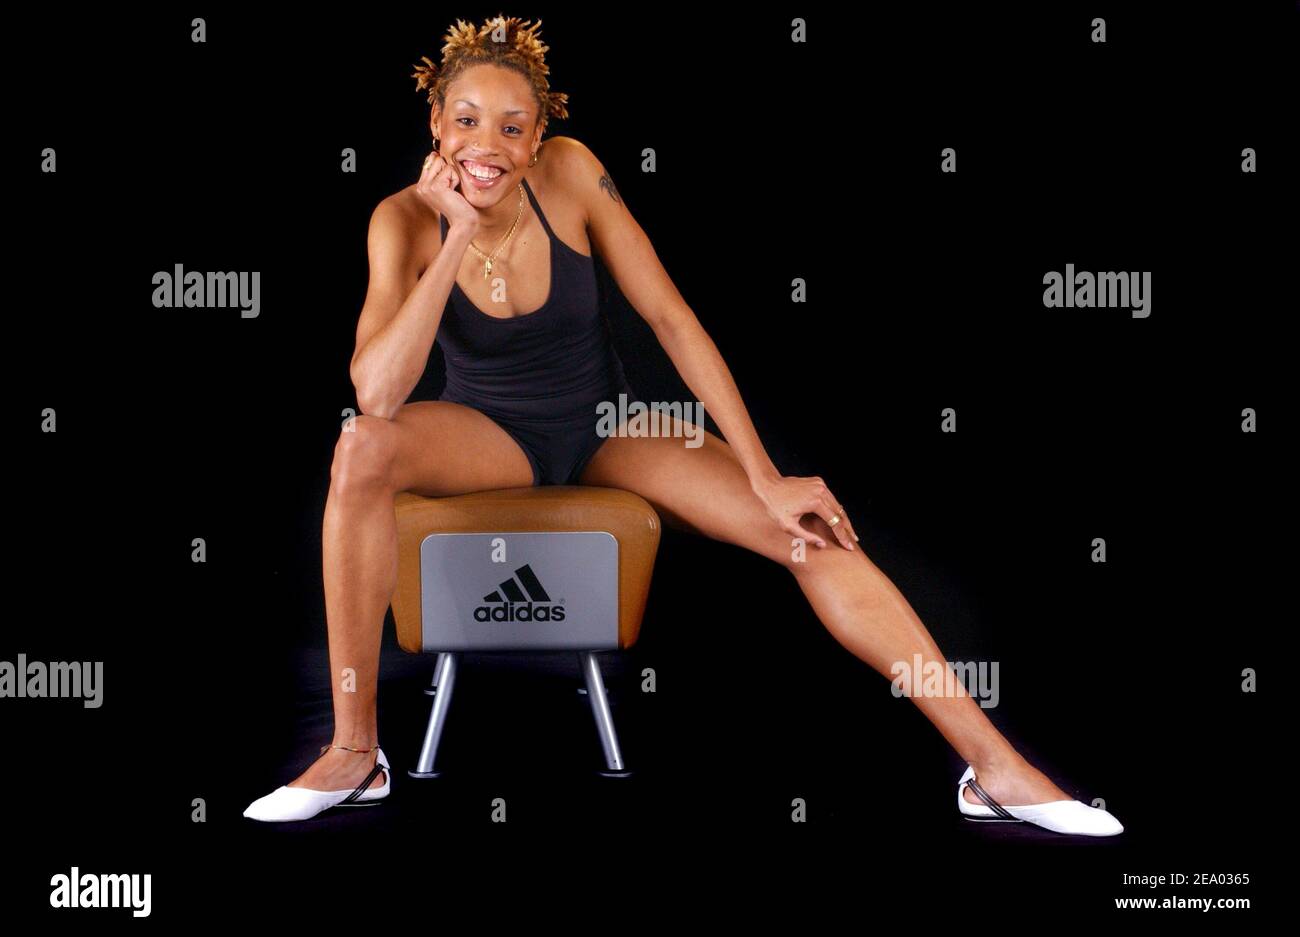 French Athlete Phara Anacharsis attends the party held in the Adidas store  in Paris, France, on February 16, 2005, to launch the new Adidas women's  fashion line designed by British fashion designer